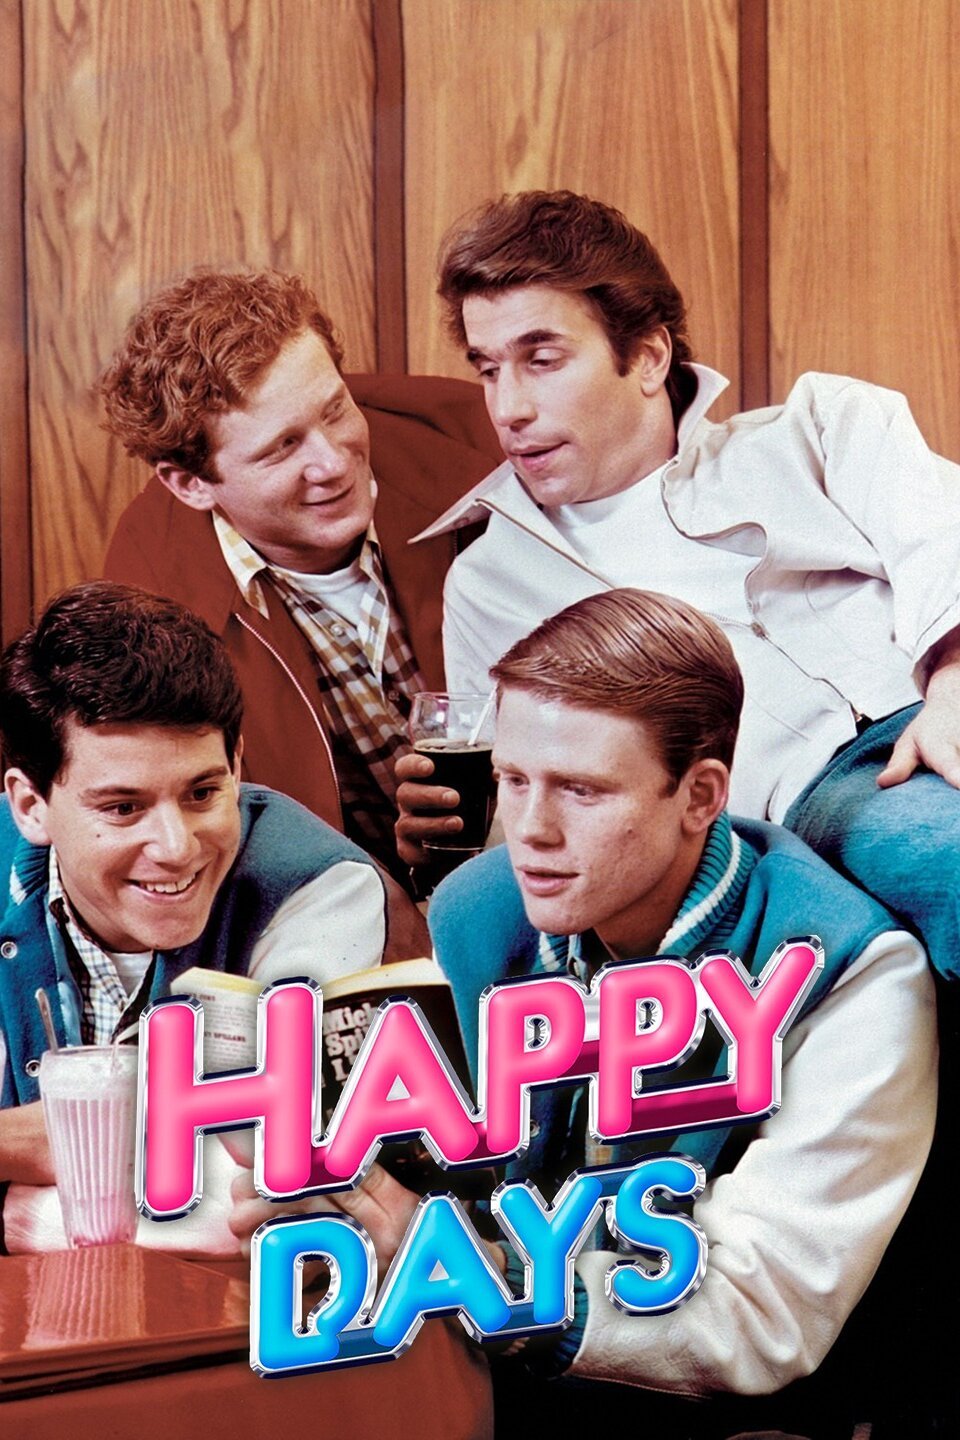 happy days movie review in english